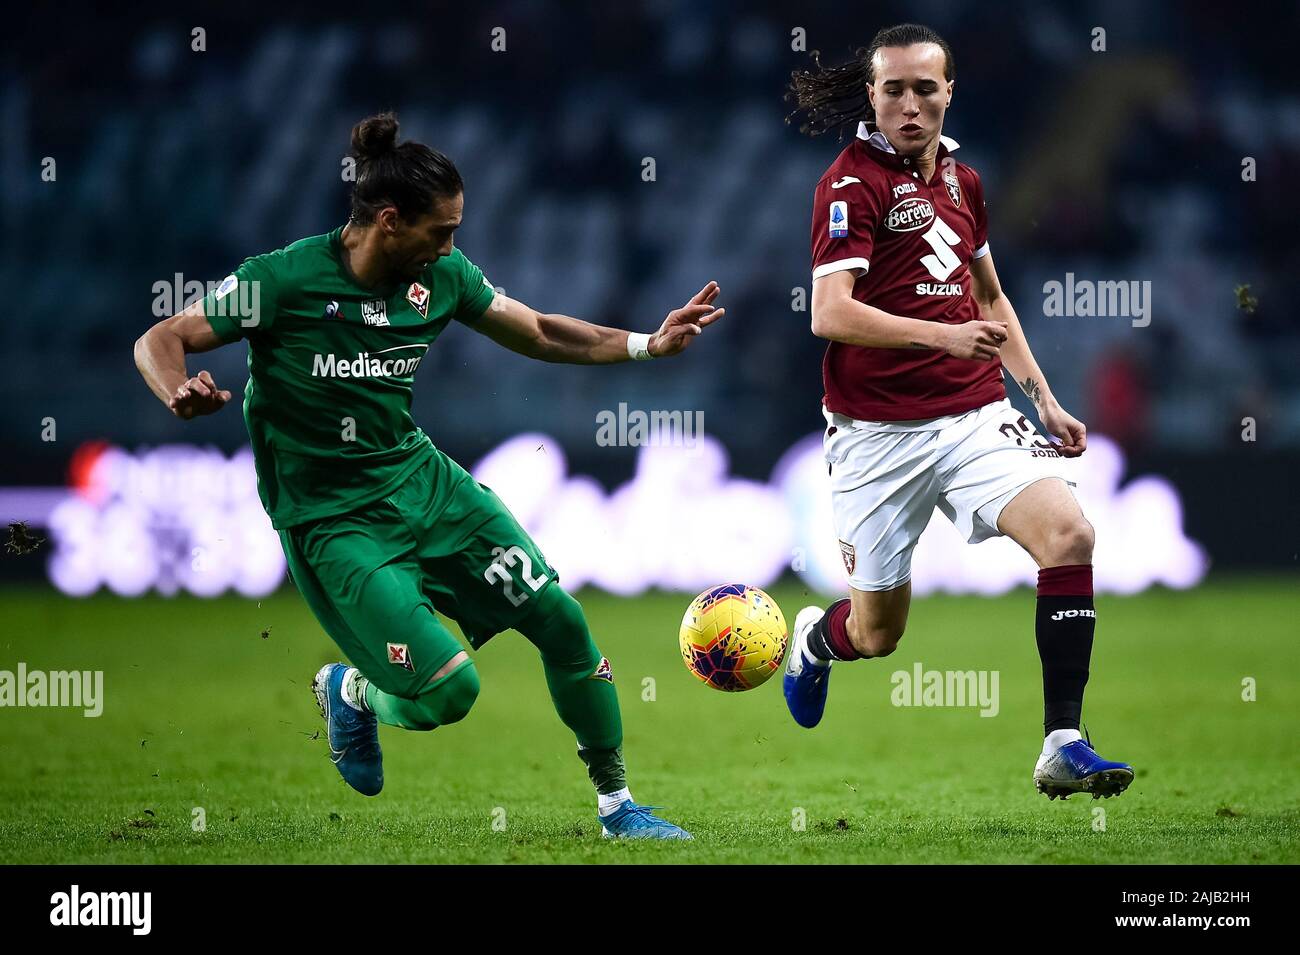 Turin, Italy - 08 December, 2019: Diego Laxalt (R) of Torino FC is challenged by Martin Caceres of ACF Fiorentina during the Serie A football match between Torino FC and ACF Fiorentina. Torino FC won 2-1 over ACF Fiorentina. Credit: Nicolò Campo/Alamy Live News Stock Photo